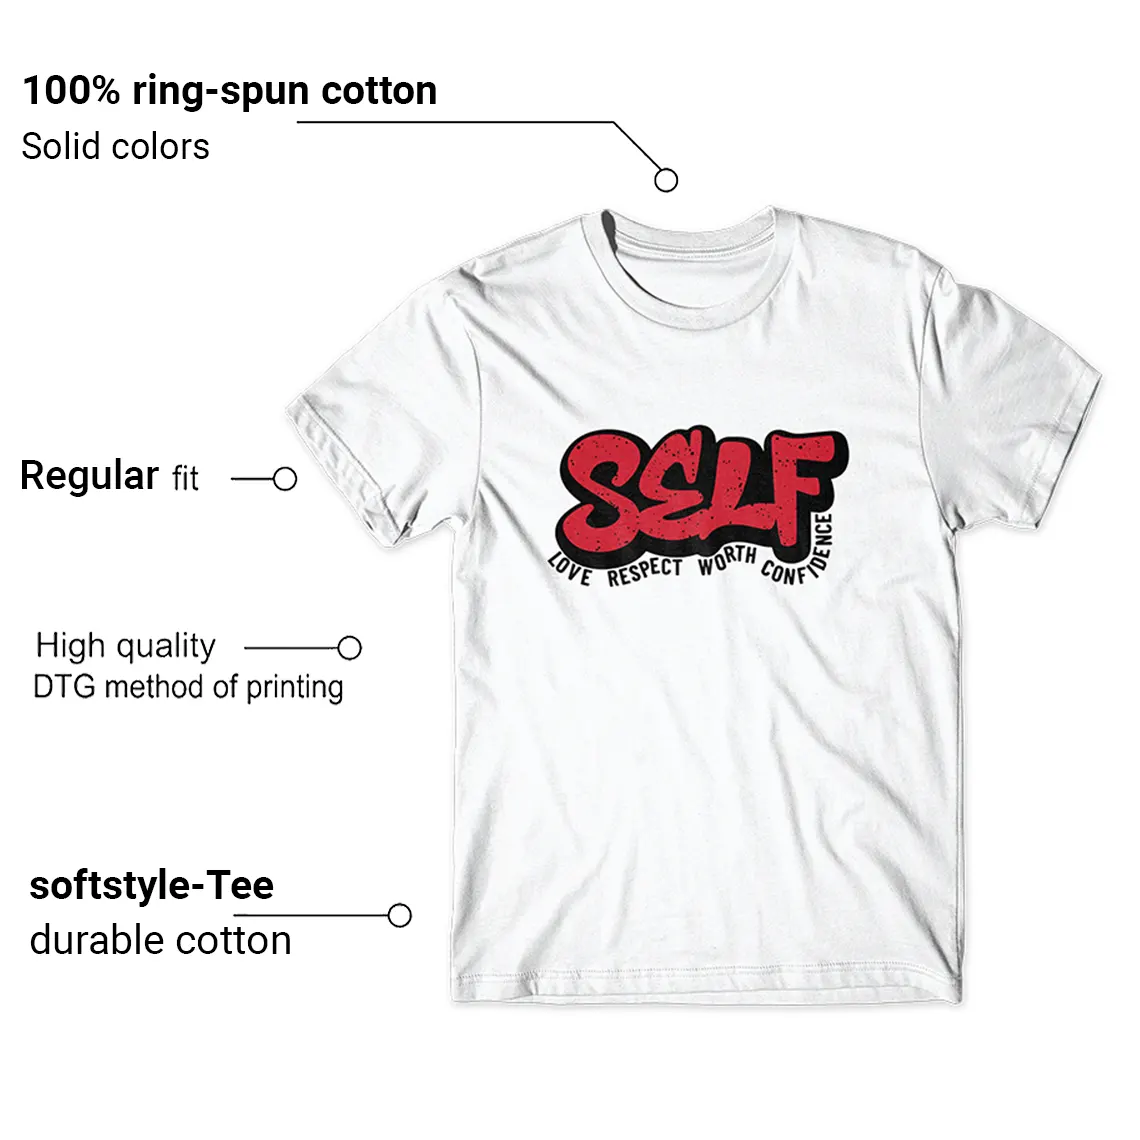 Jordan 4 Red Cement Self Love Graphic T-shirt Features